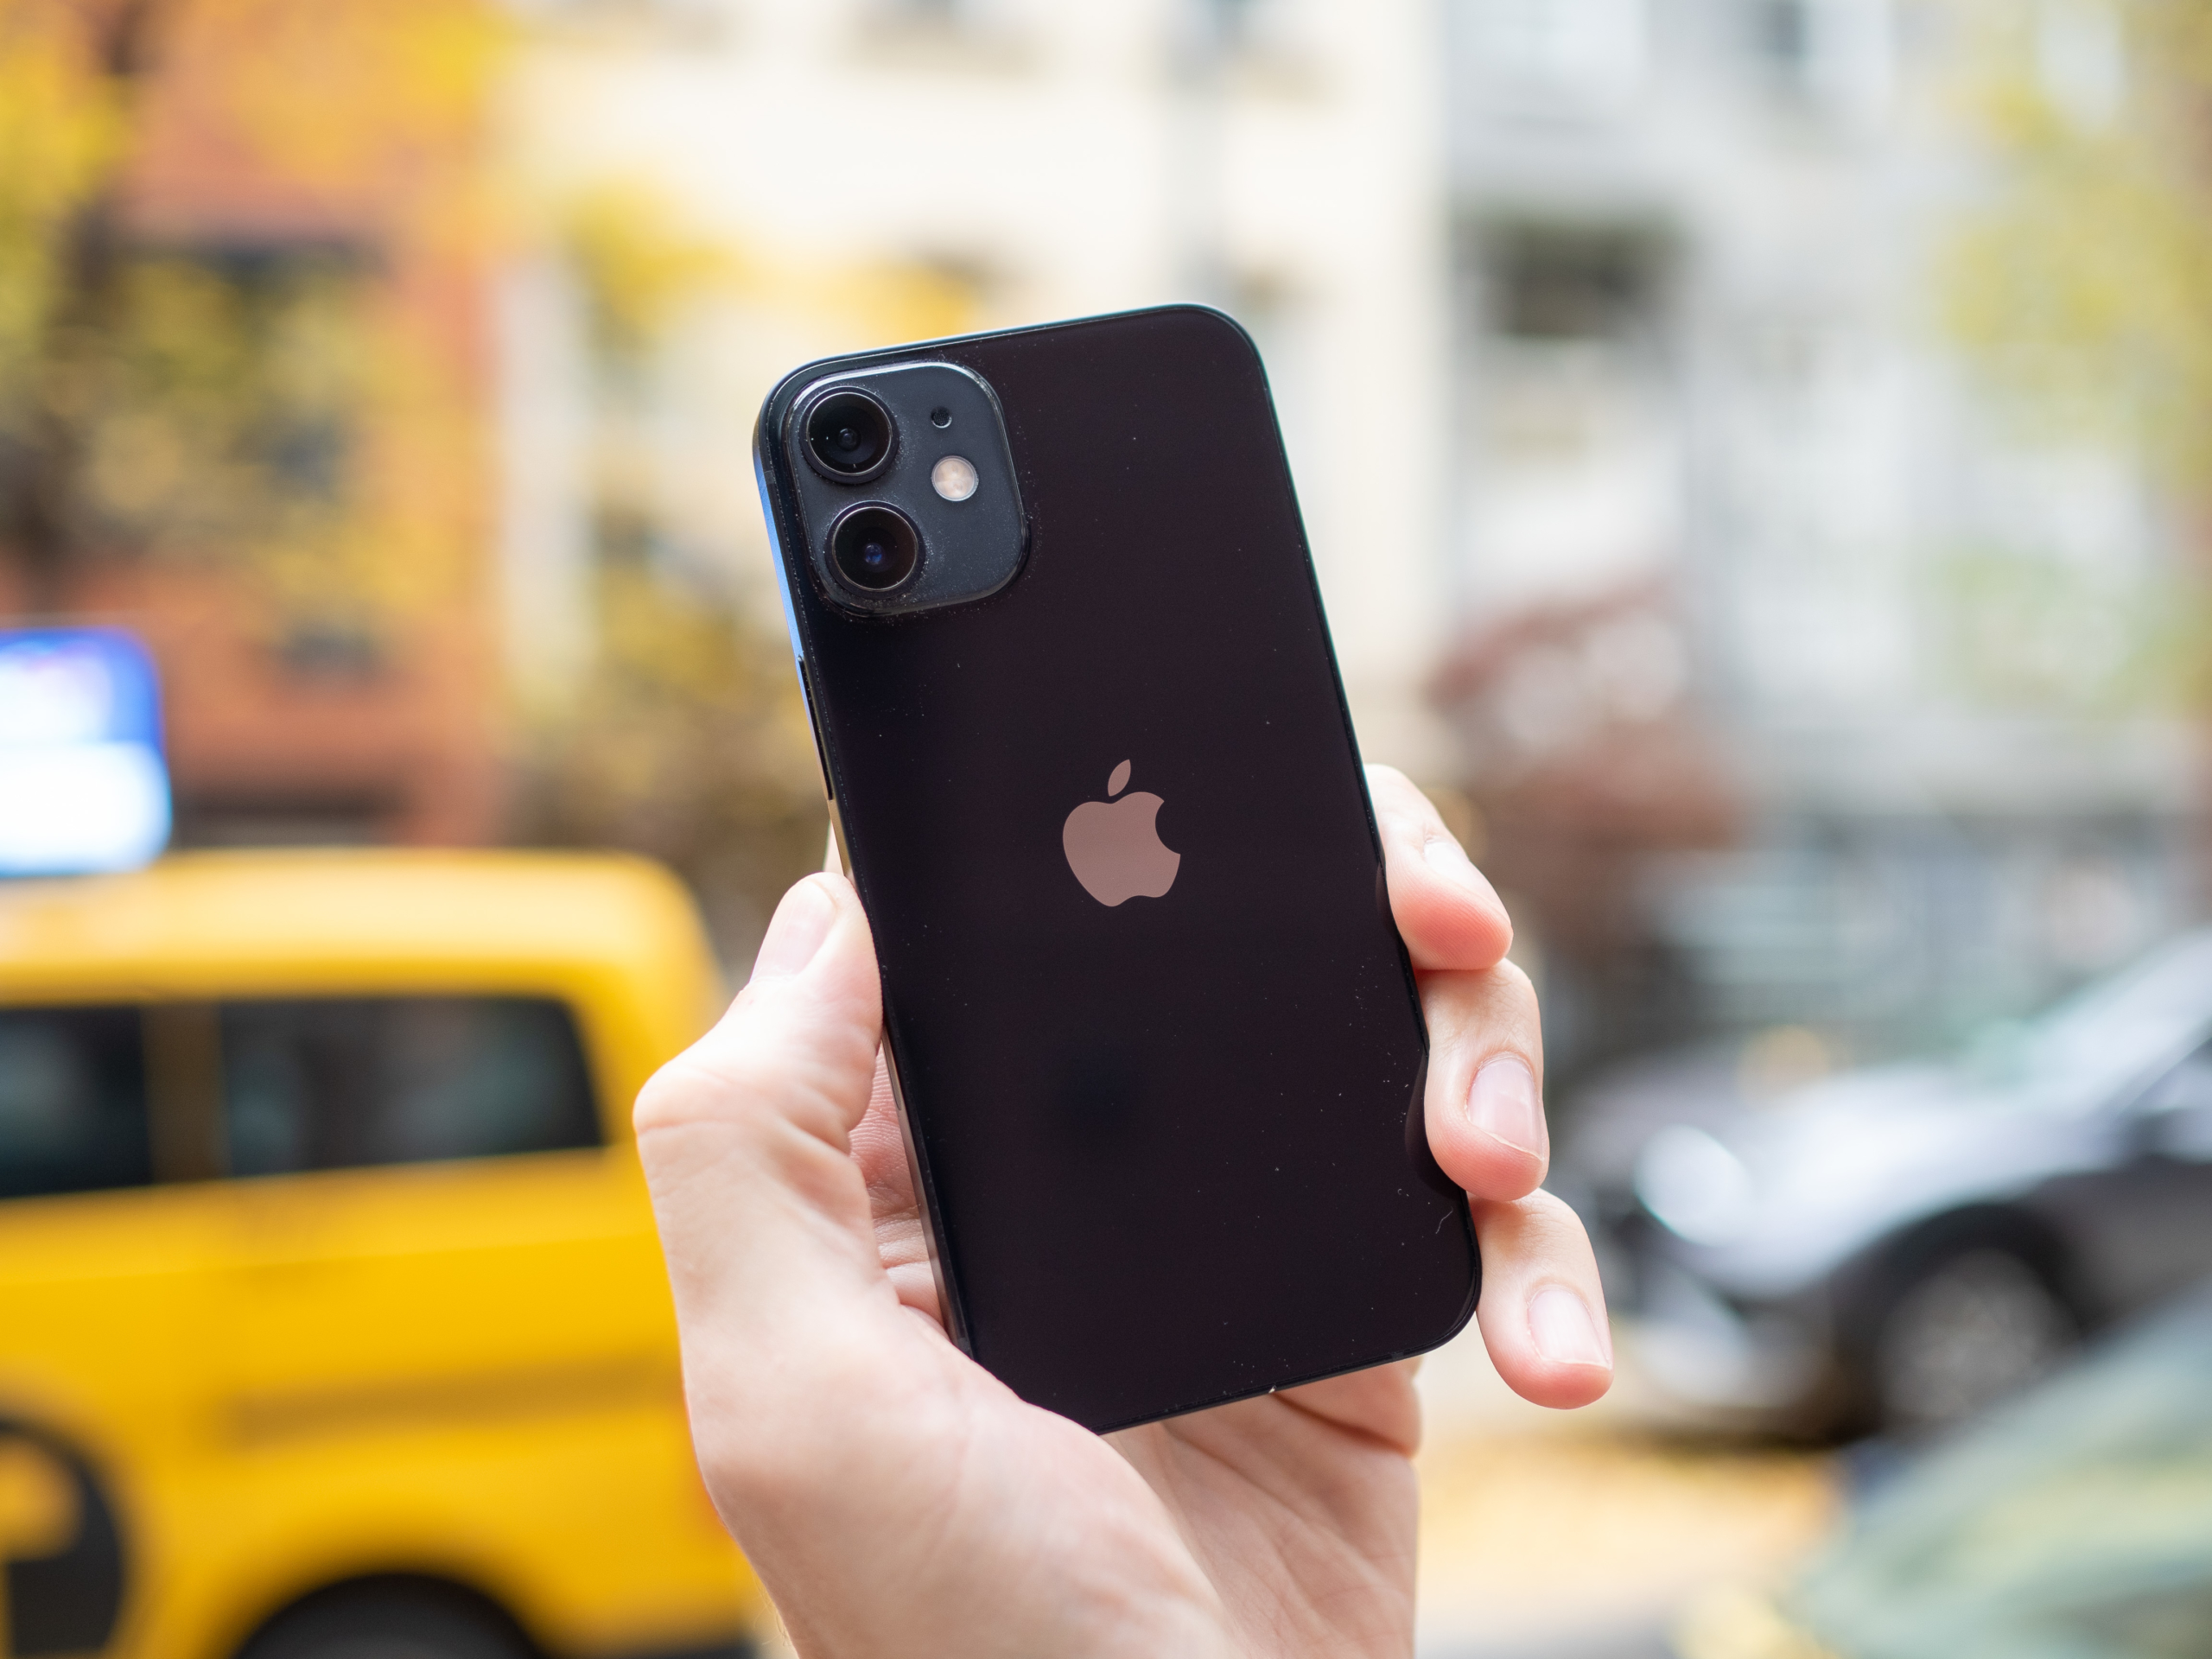 iPhone XS Max vs. iPhone 12 mini: Here's What I Think After the Upgrade